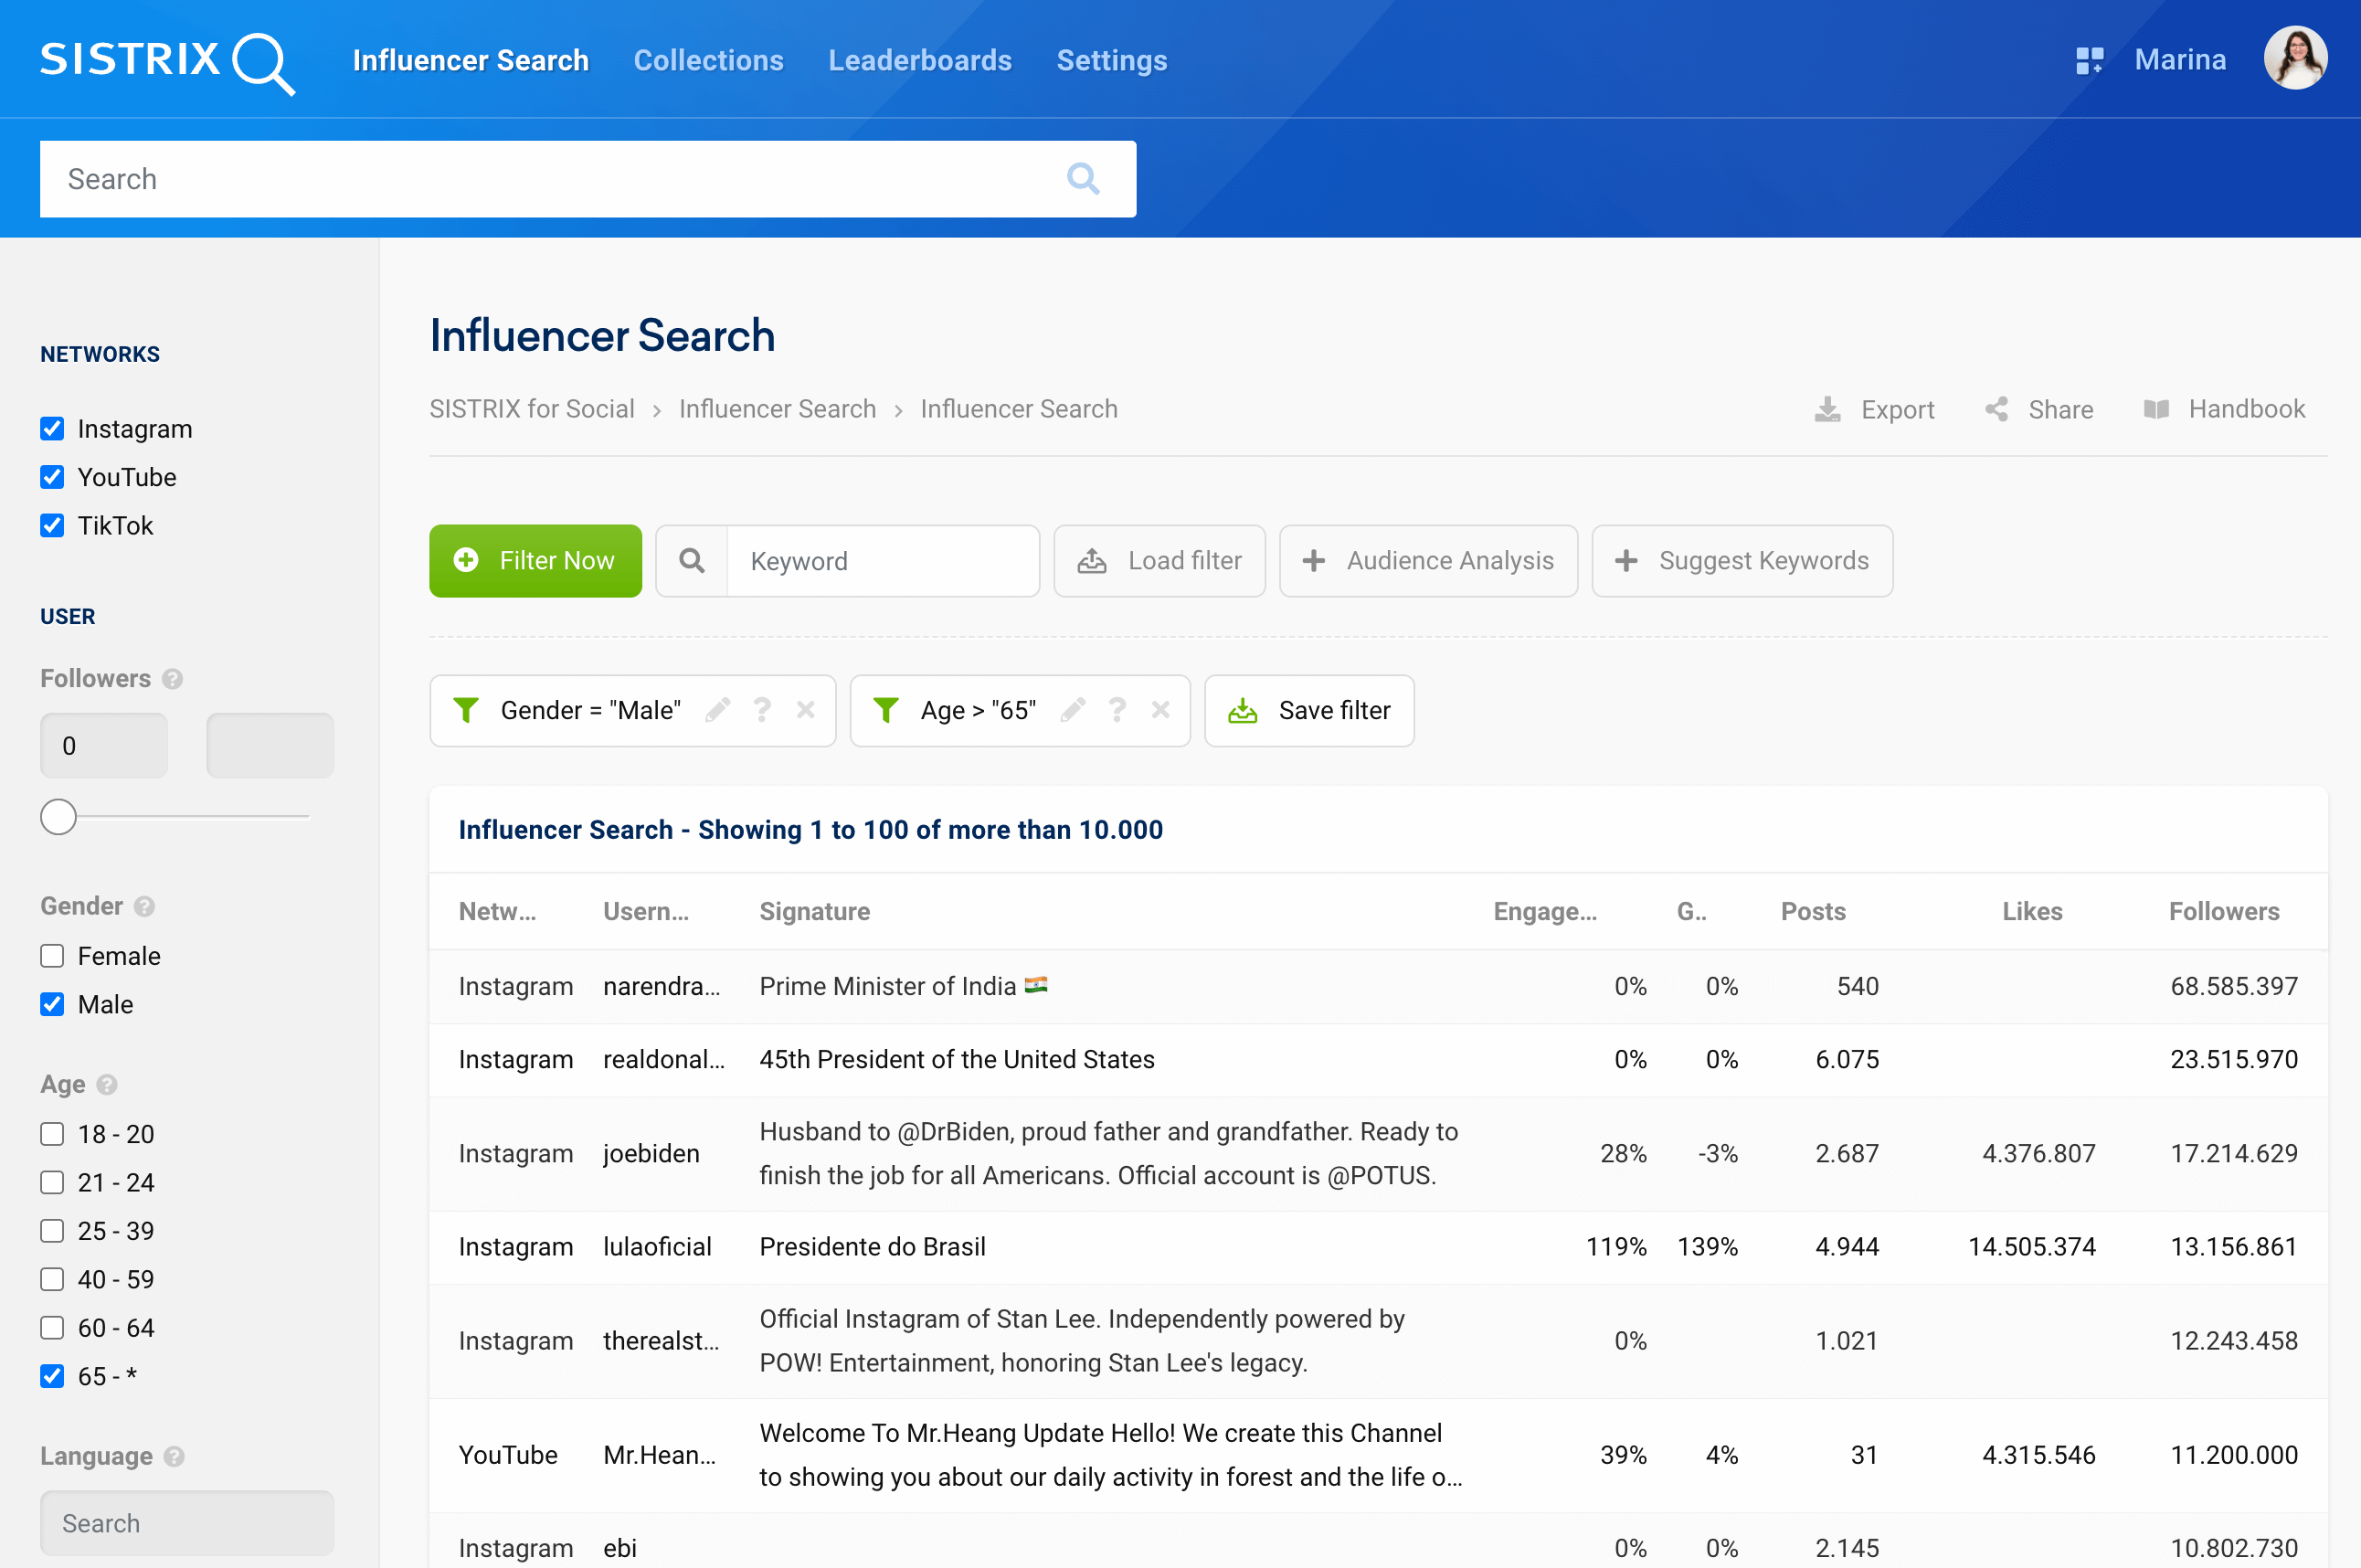 Influencer Search in the SISTRIX Toolbox